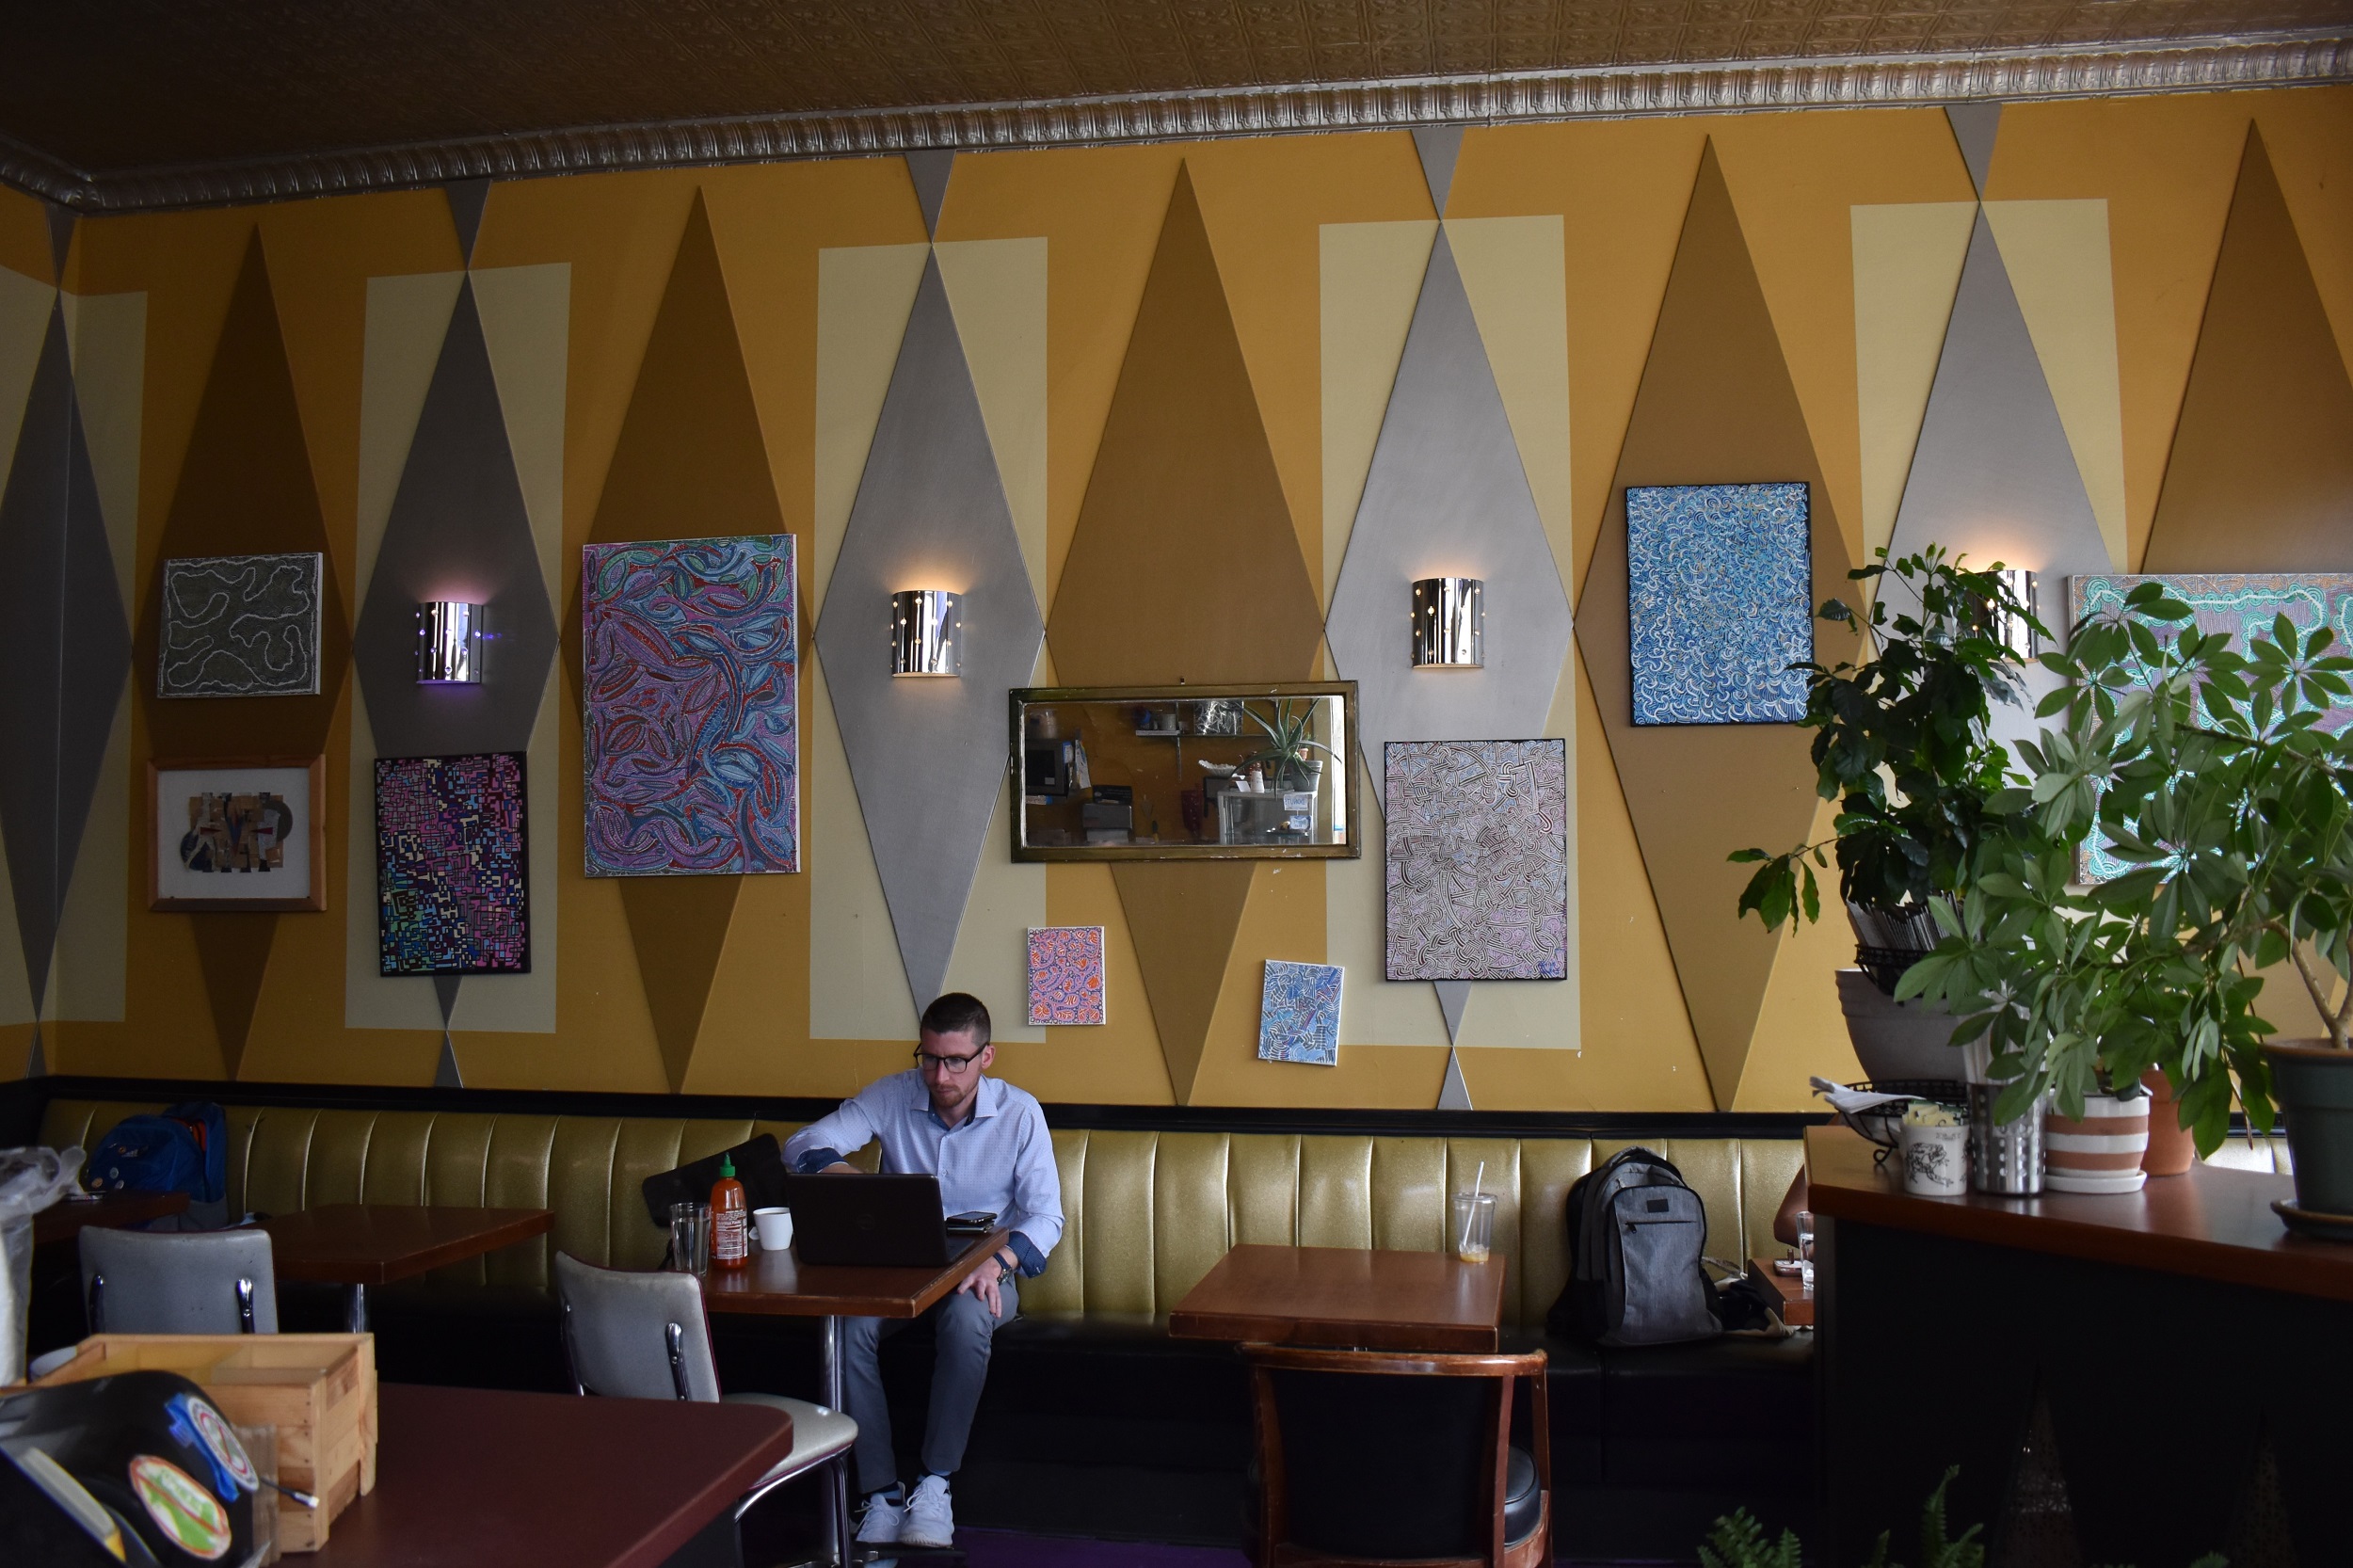 A customer works on a laptop at one of the tables at The Victory. The walls are filled with gold and silver diamonds and feature owner Patrick Downey's artwork that can be purchased. (Alyssa Allemand/WPR)